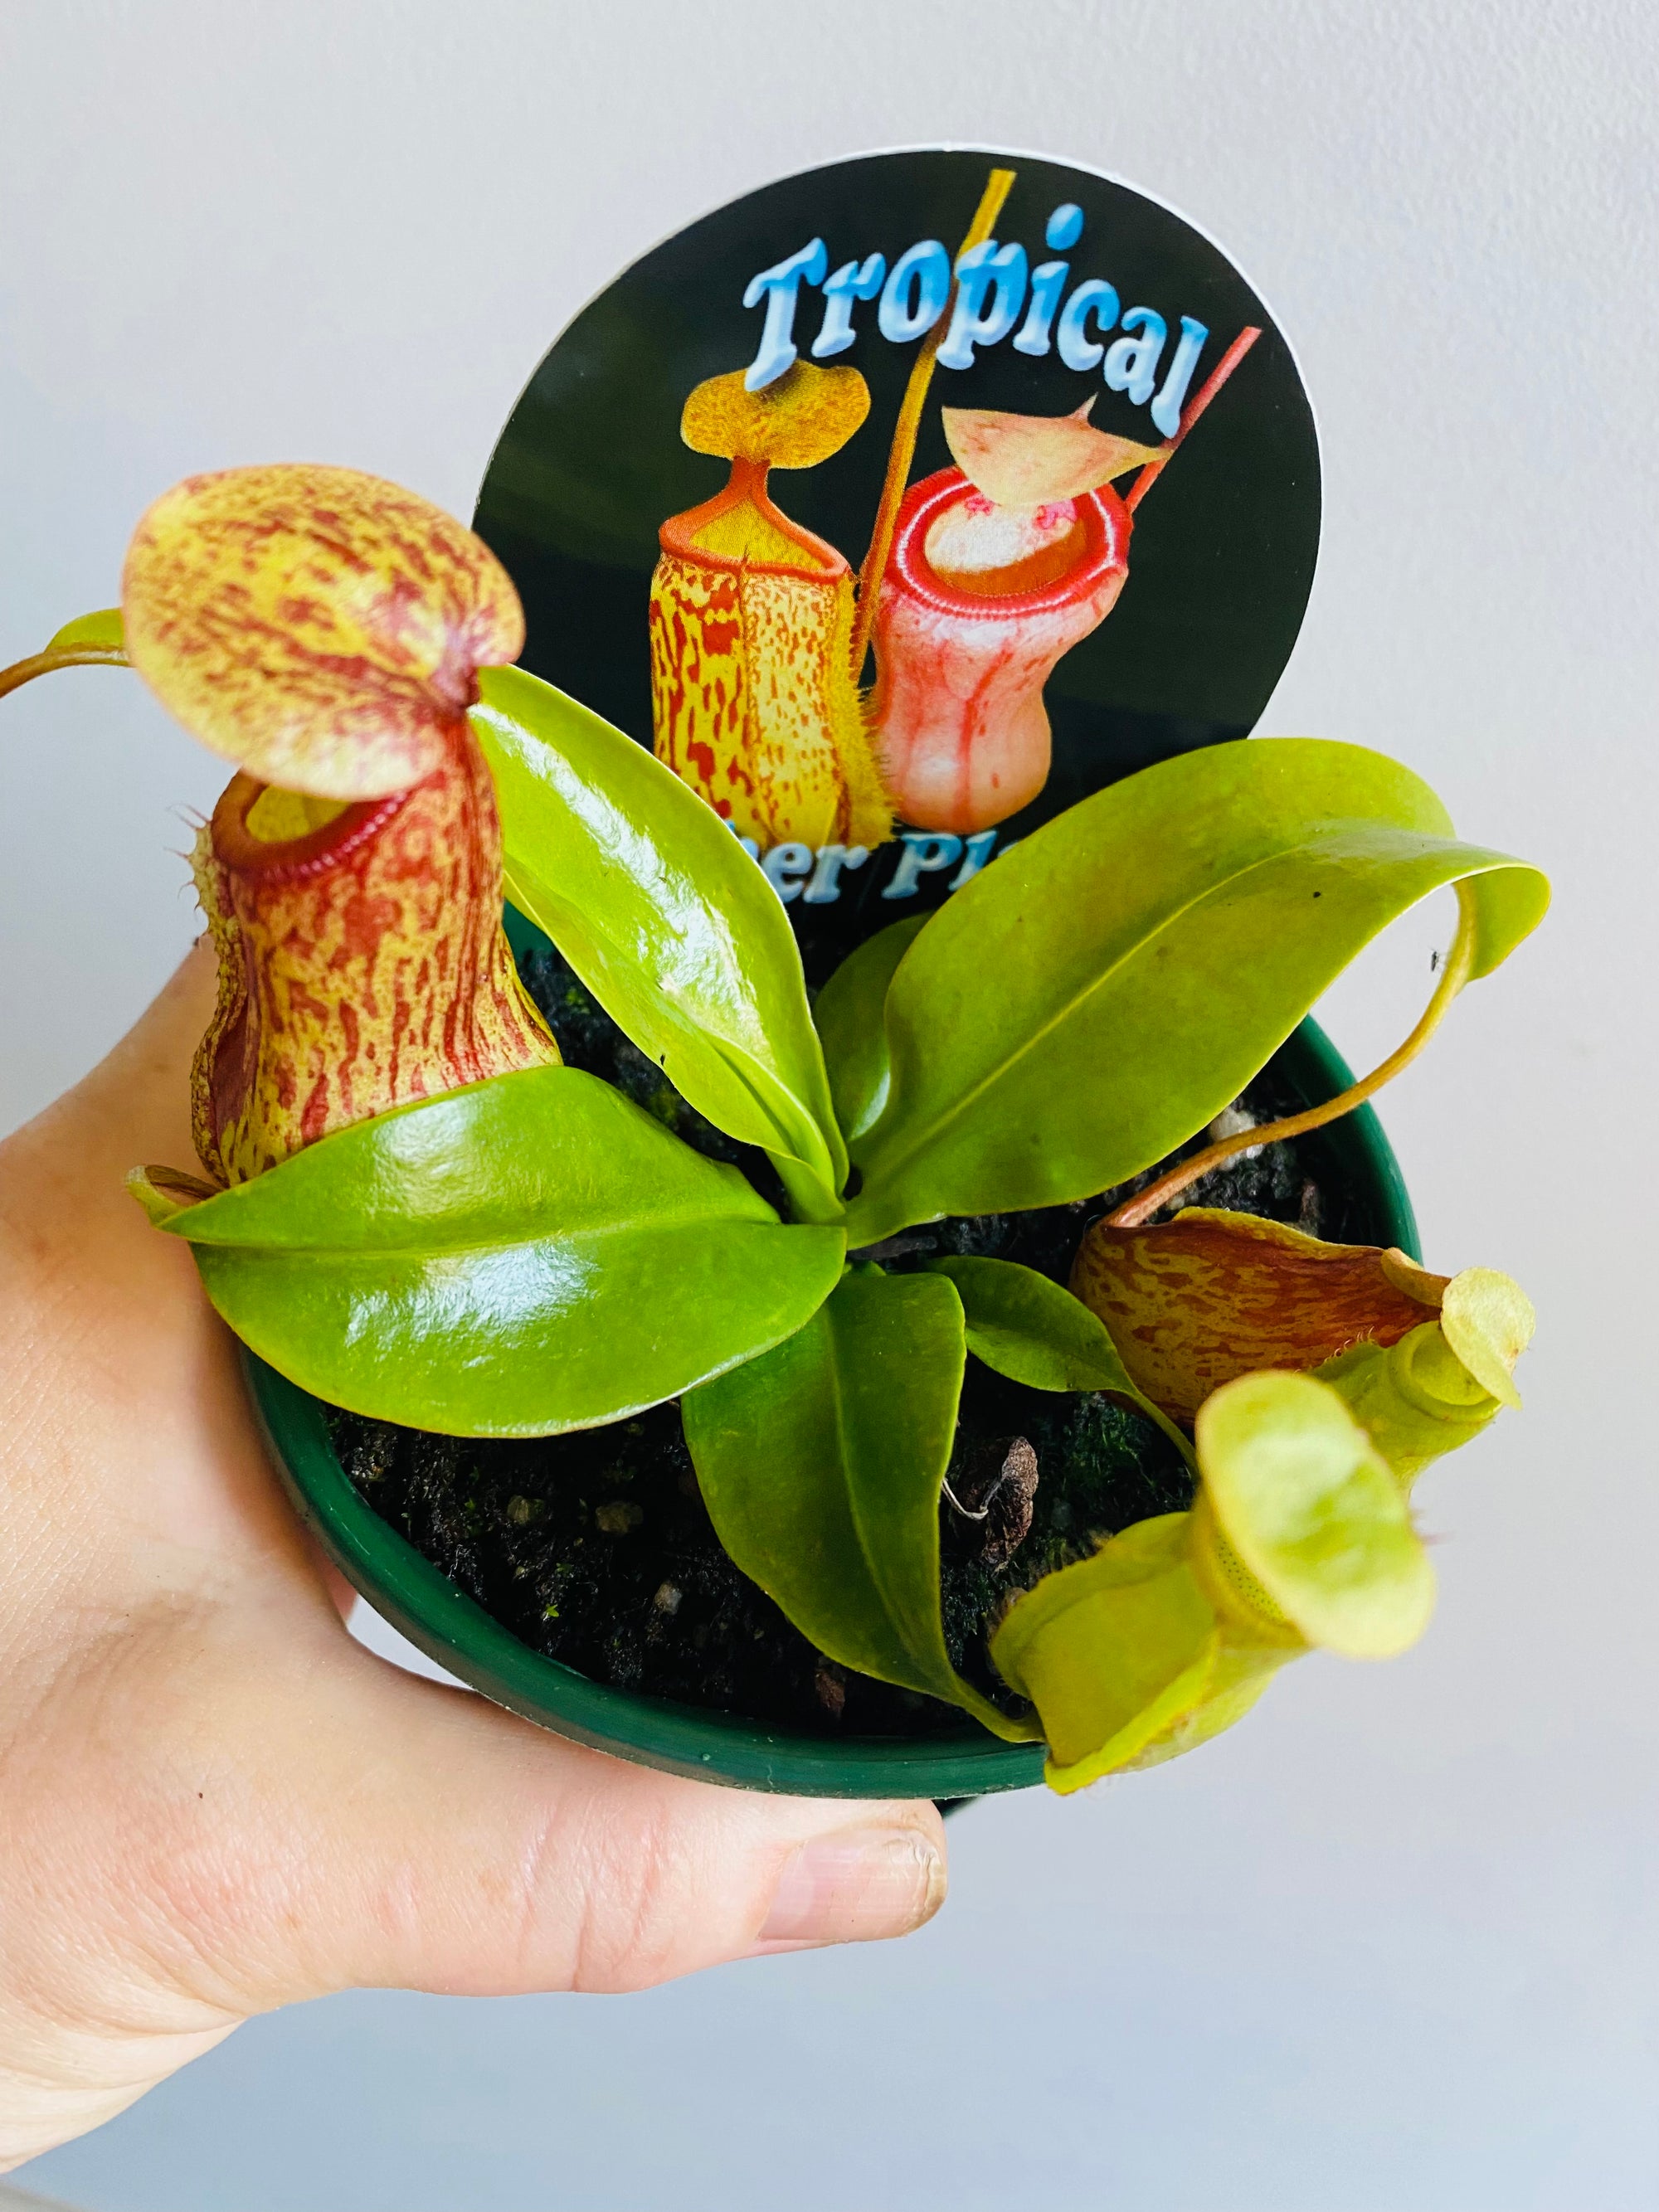 Nepenthes - Pitcher Plant (unlabelled)